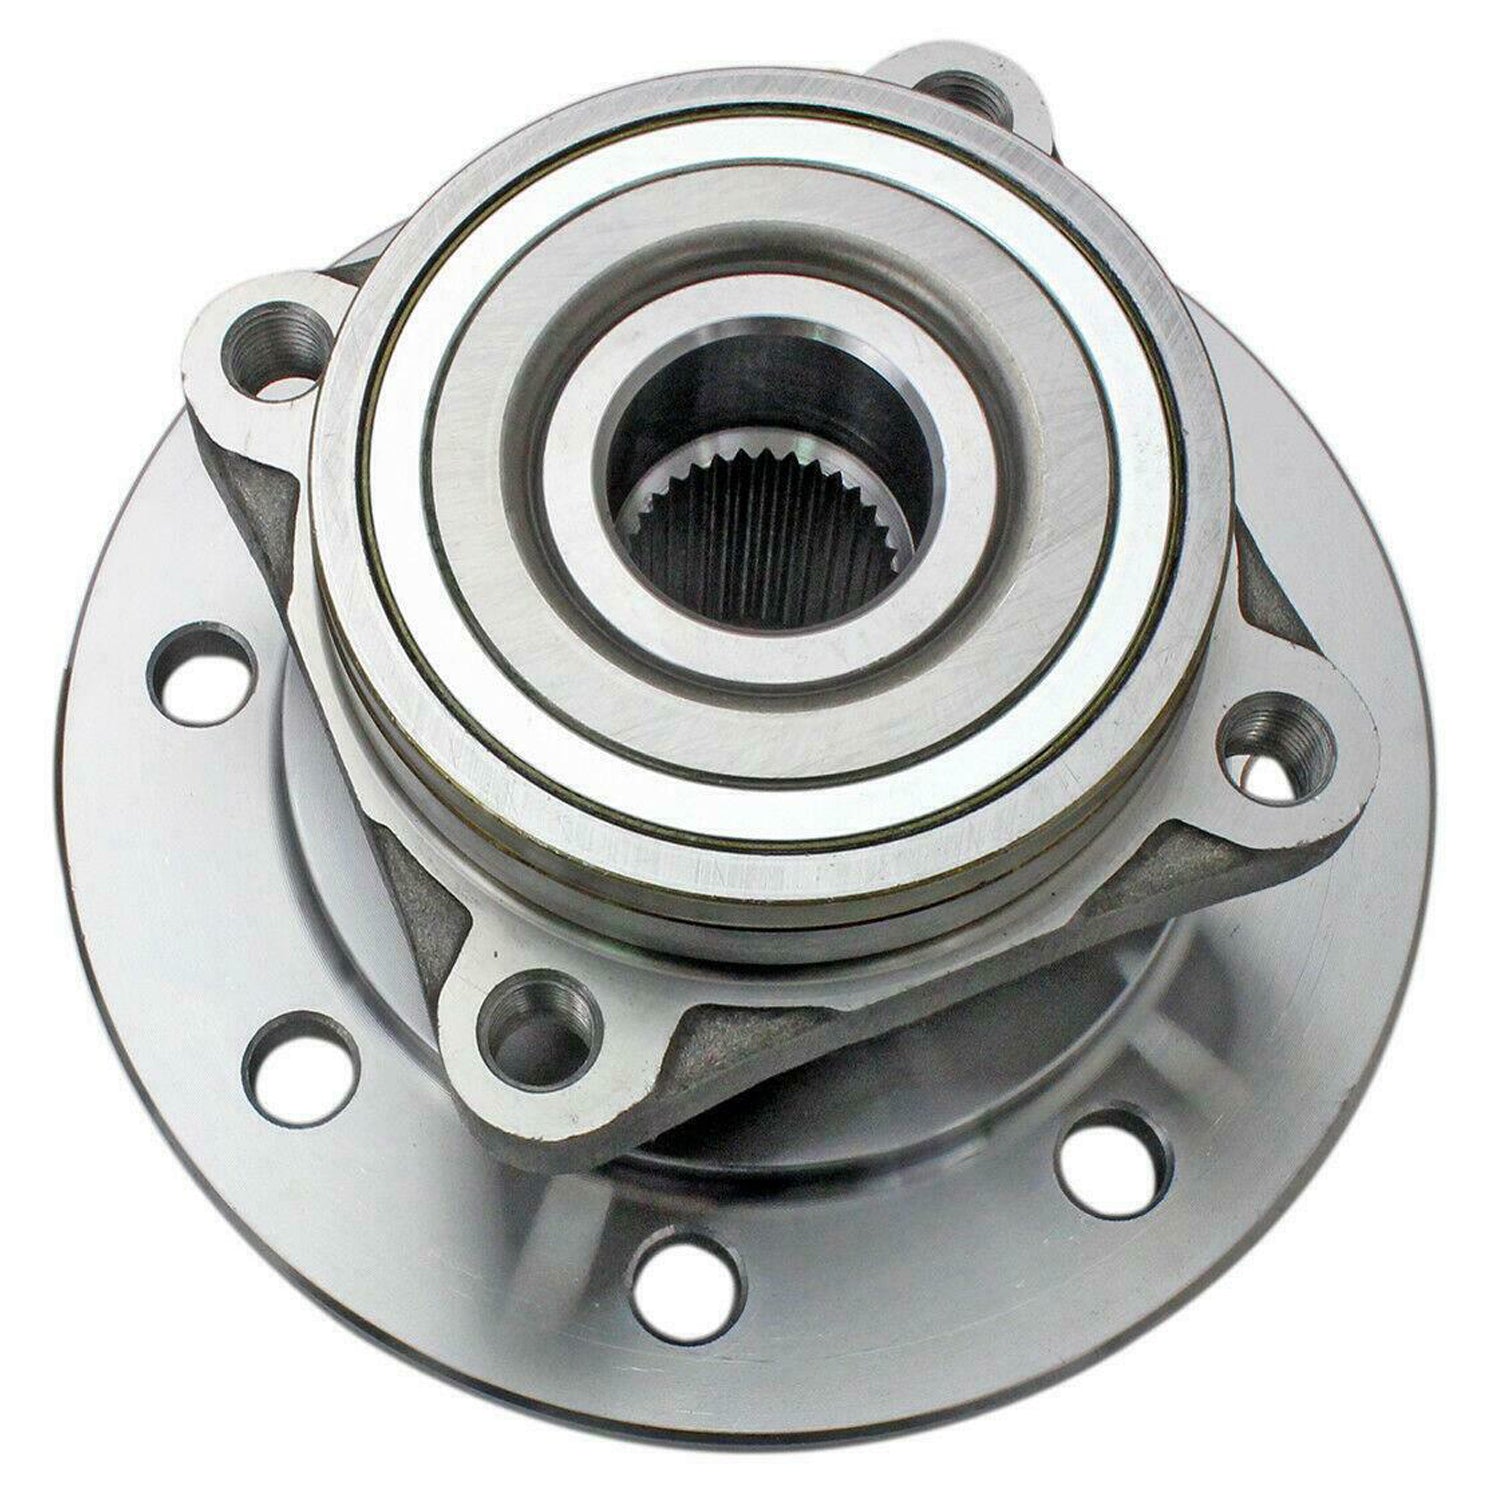 MotorbyMotor Front Wheel Bearing and Hub Assembly Replacement for 1994 1995 1996 1997 1998 1999 Dodge Ram(4WD), 1998 1999 Dodge Ram 3500 (RWD) Hub Bearing w/8 Lugs-515070 MotorbyMotor